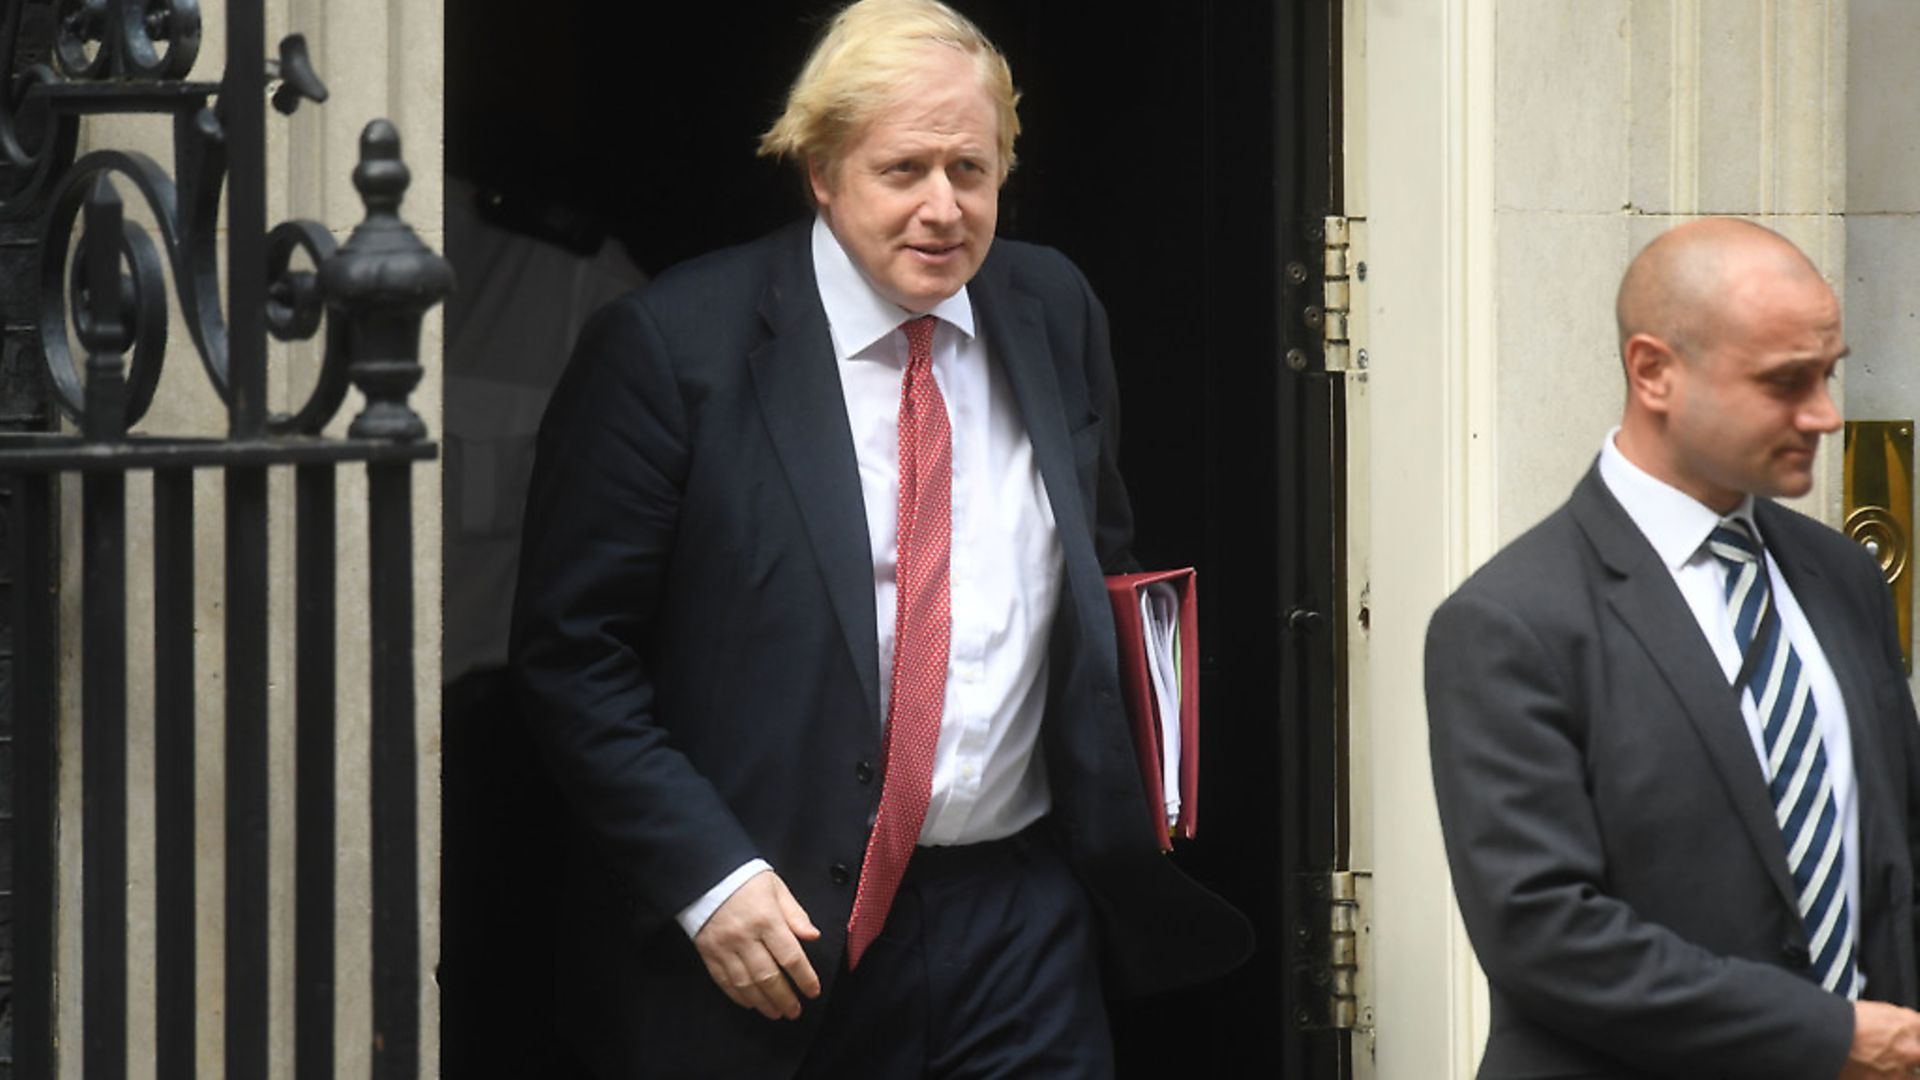 Prime Minister Boris Johnson leaves 10 Downing Street for the House of Commons. Photograph: Kirsty O'Connor/PA Wire. - Credit: PA